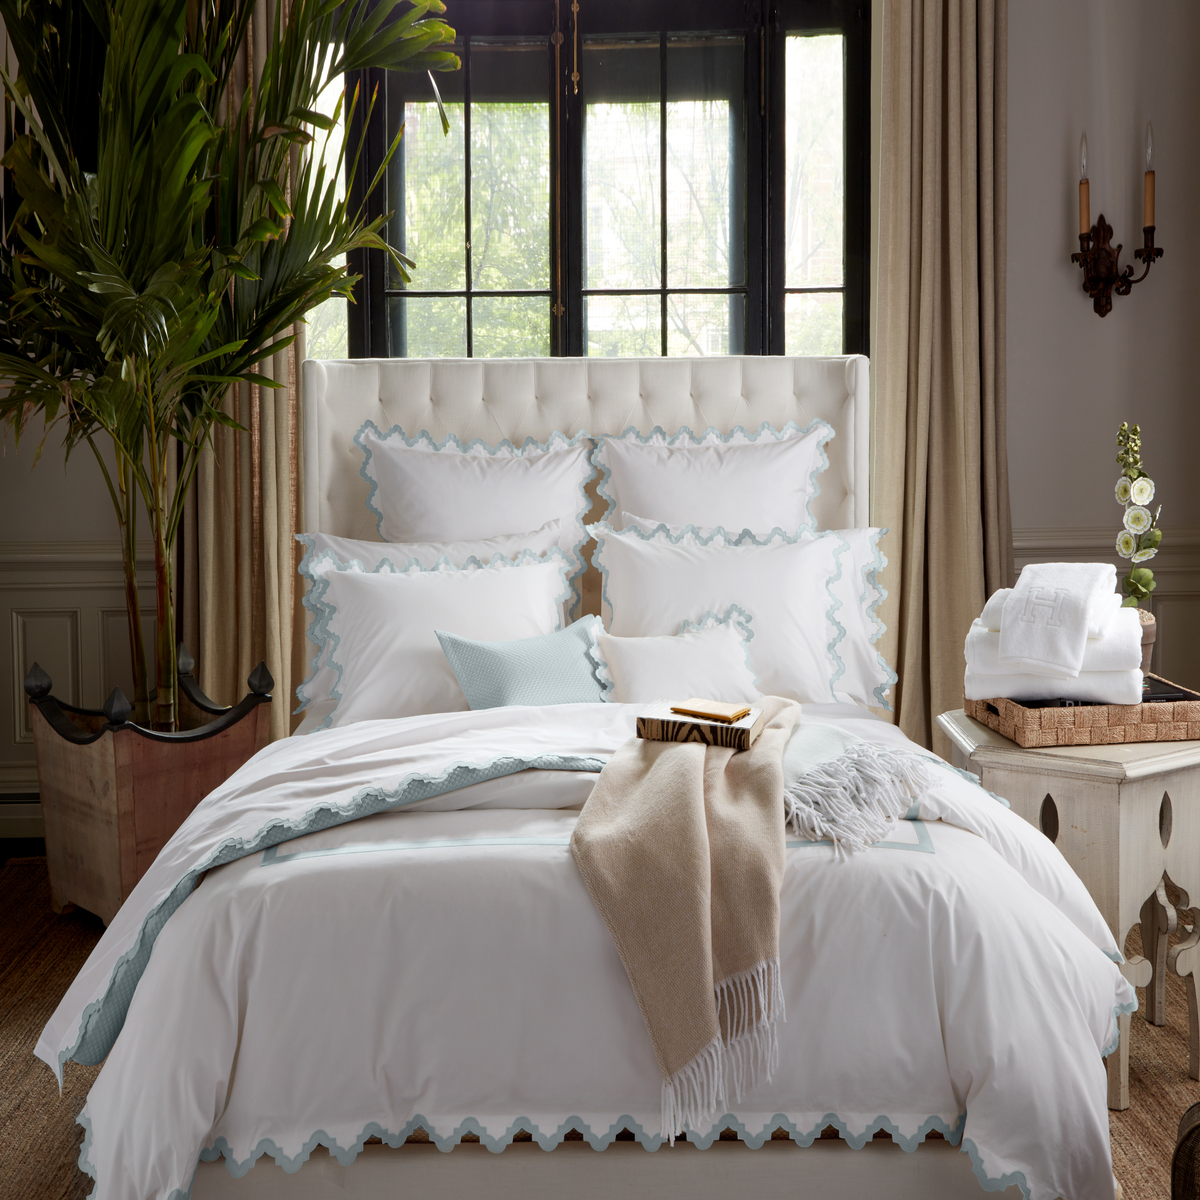 Lifestyle Image of a Full Bed Dressed in Matouk Aziza Bedding in Pool Color